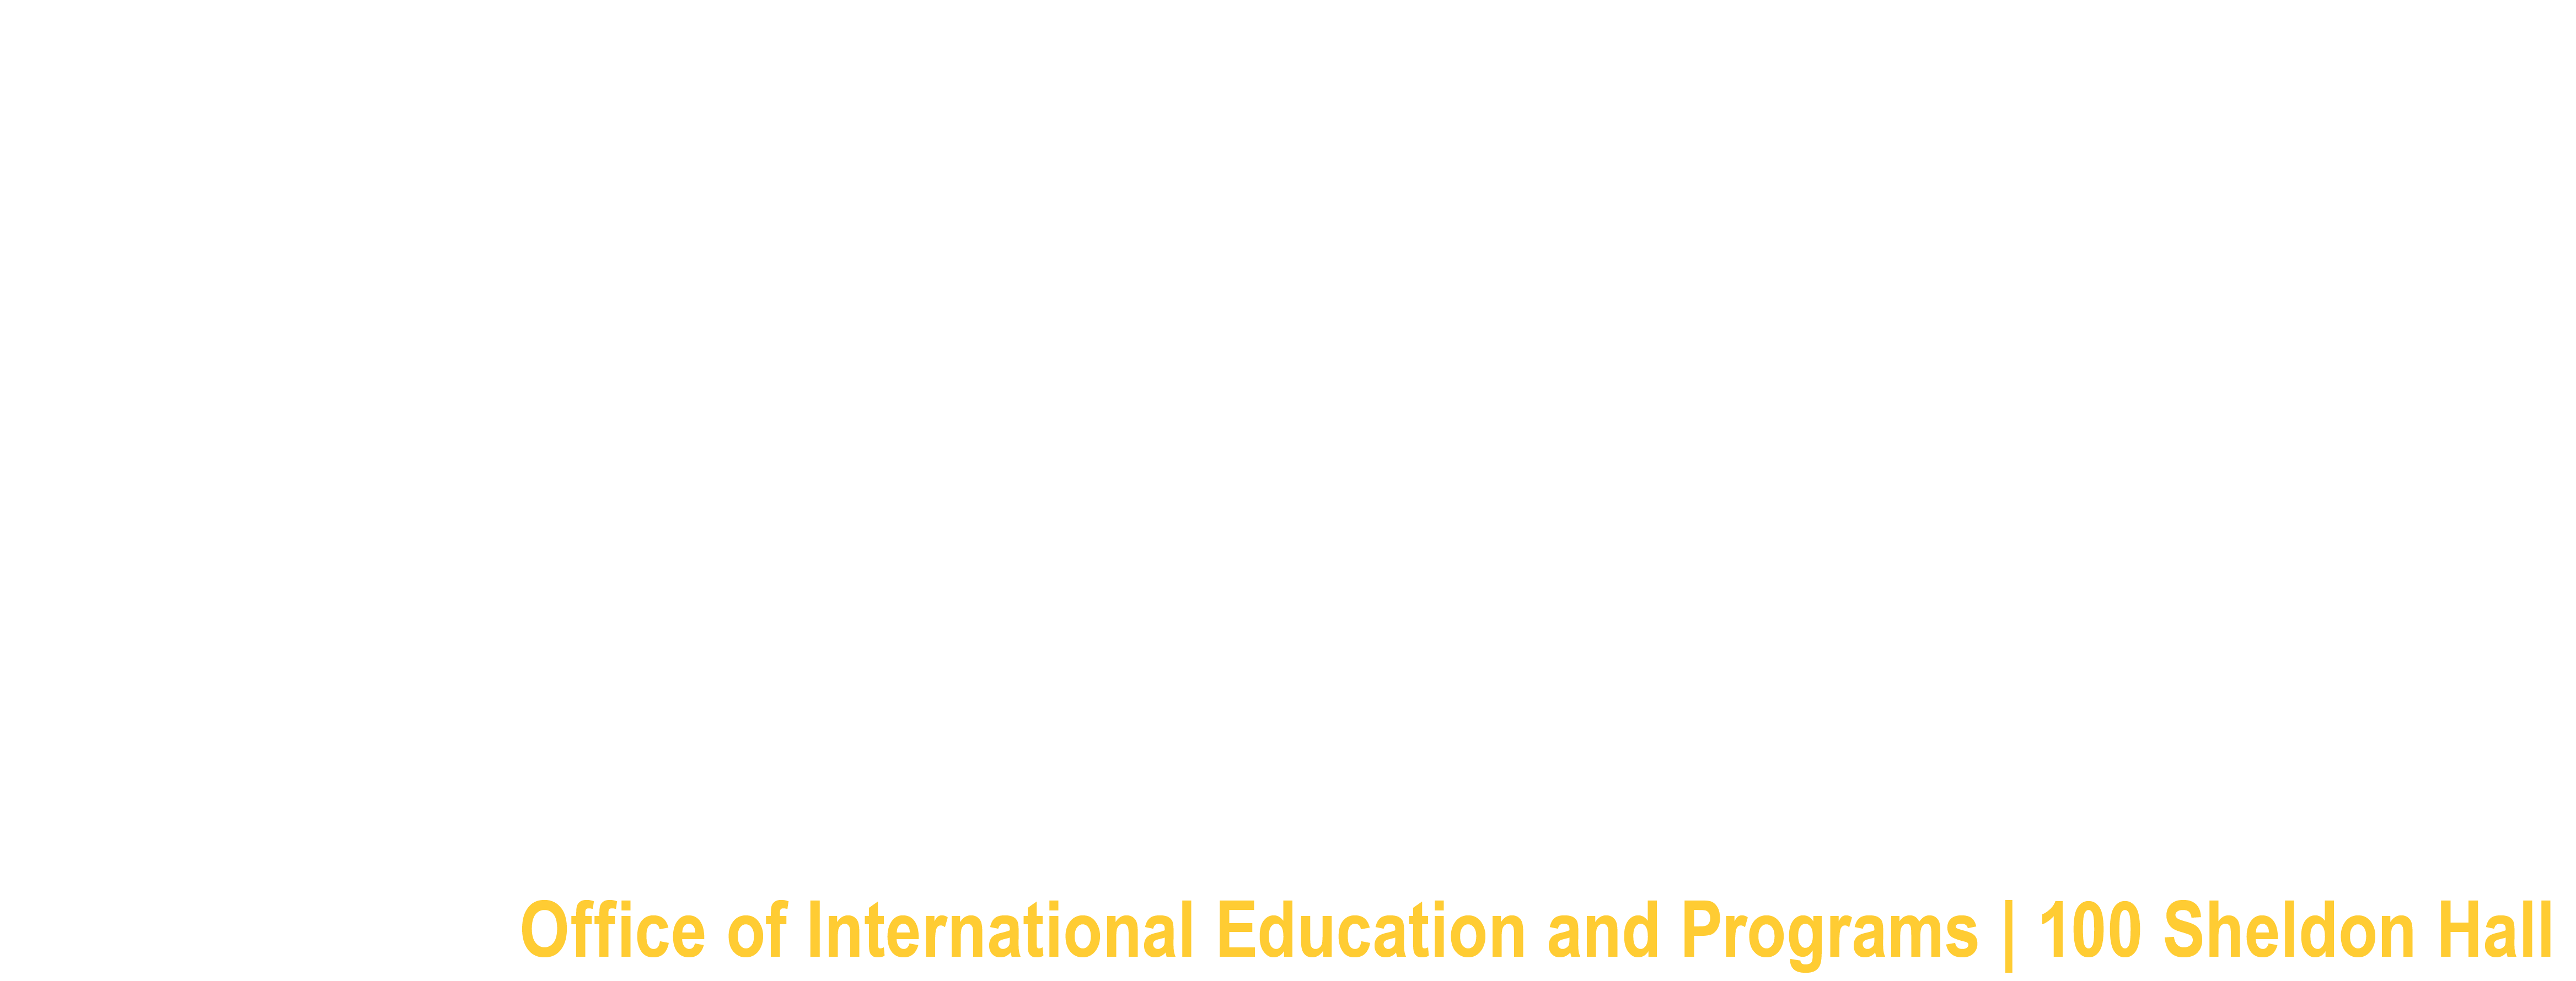 SUNY Oswego logo in white, with Campus Address Office of International Education and Programs | 100 Sheldon Hall in yellow